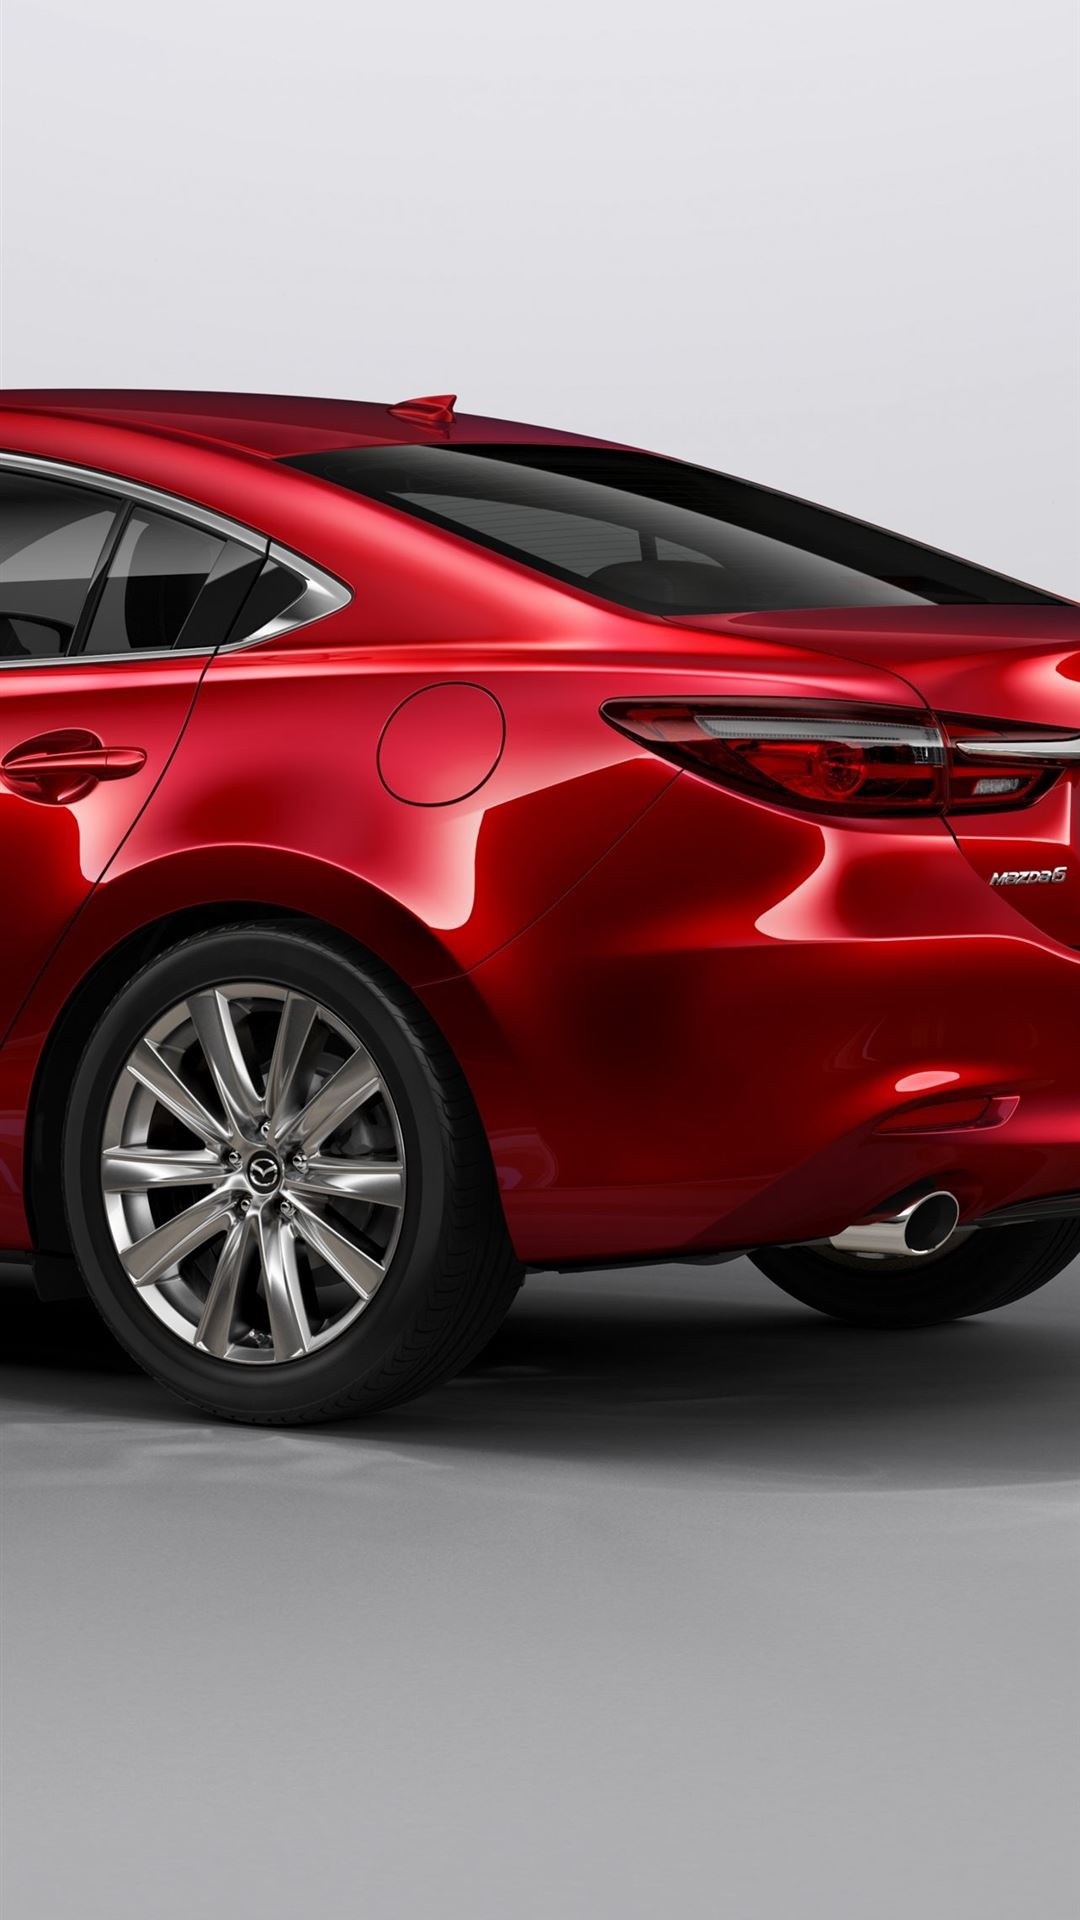 Mazda 6, iPhone wallpapers, Free download, 1080x1920 Full HD Handy